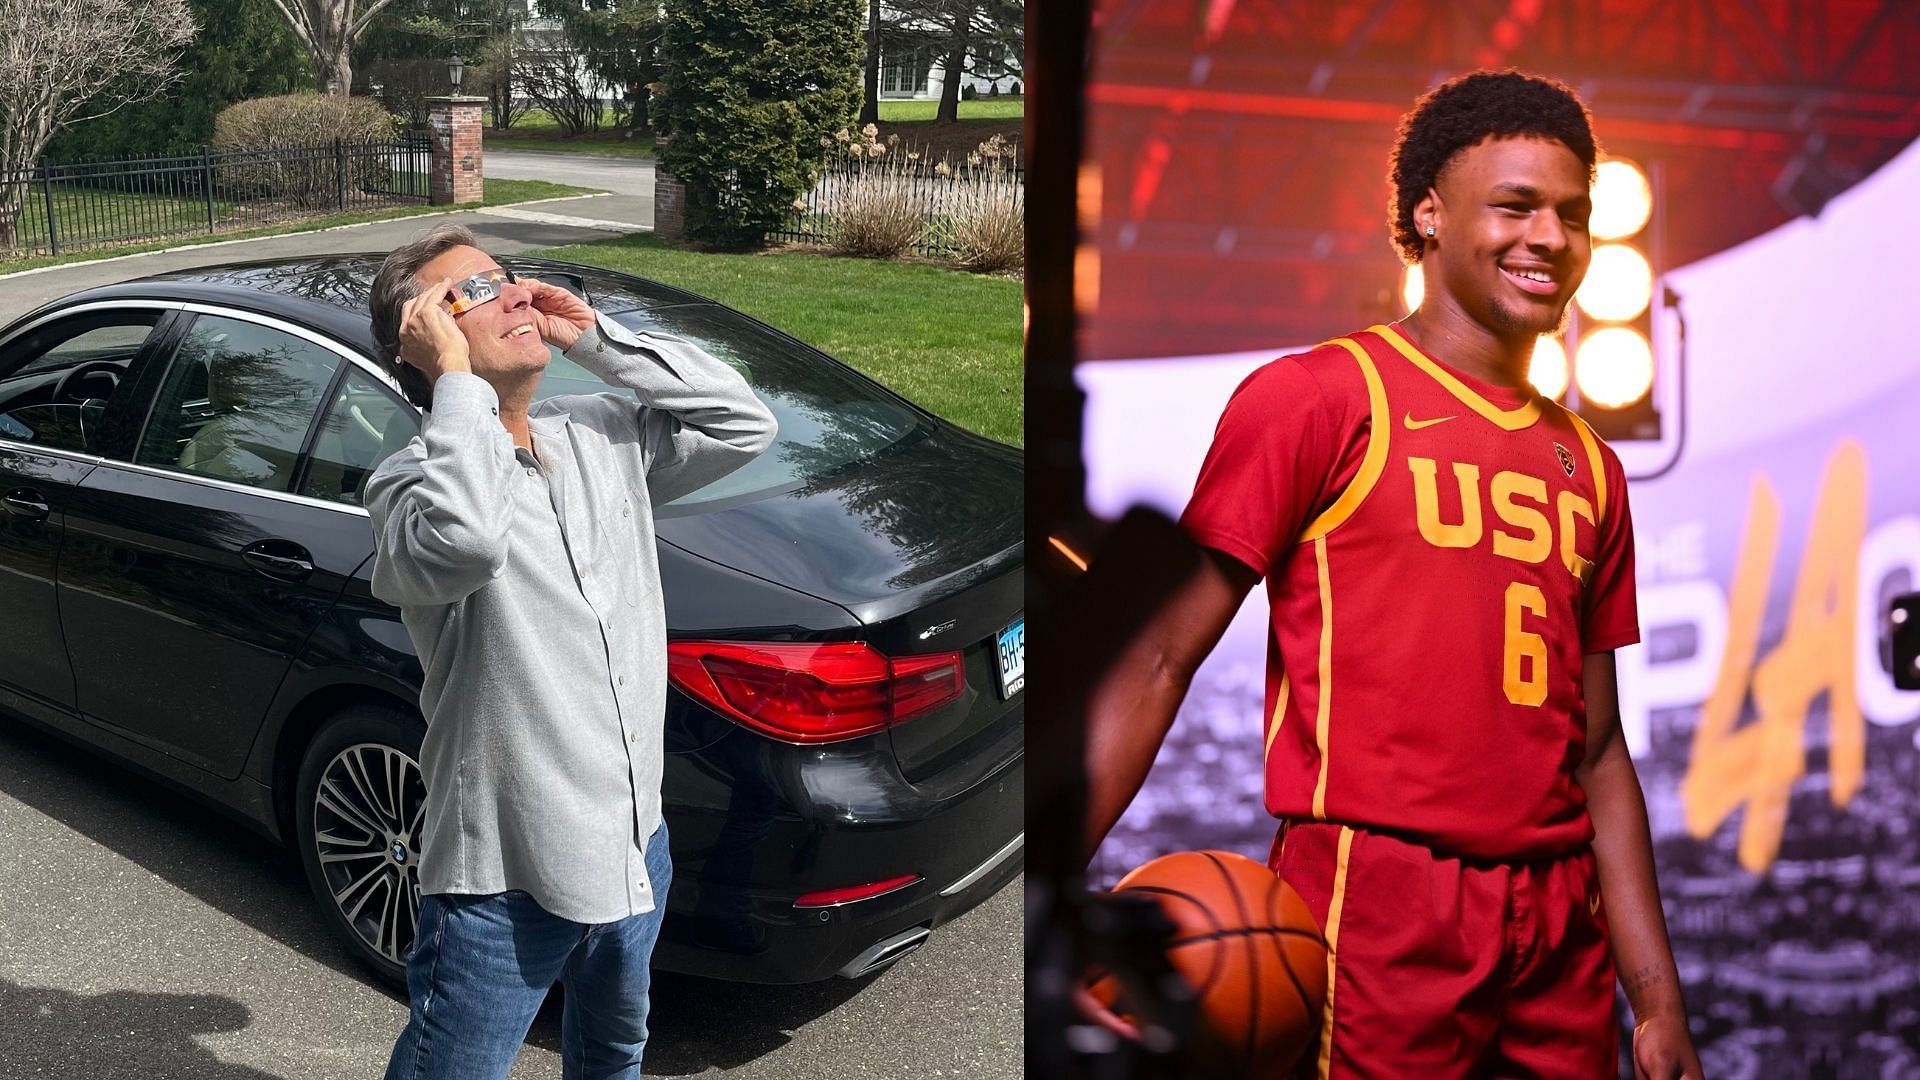 Picture Sources: @USC_Hoops, @MadDogUnleashed (X)